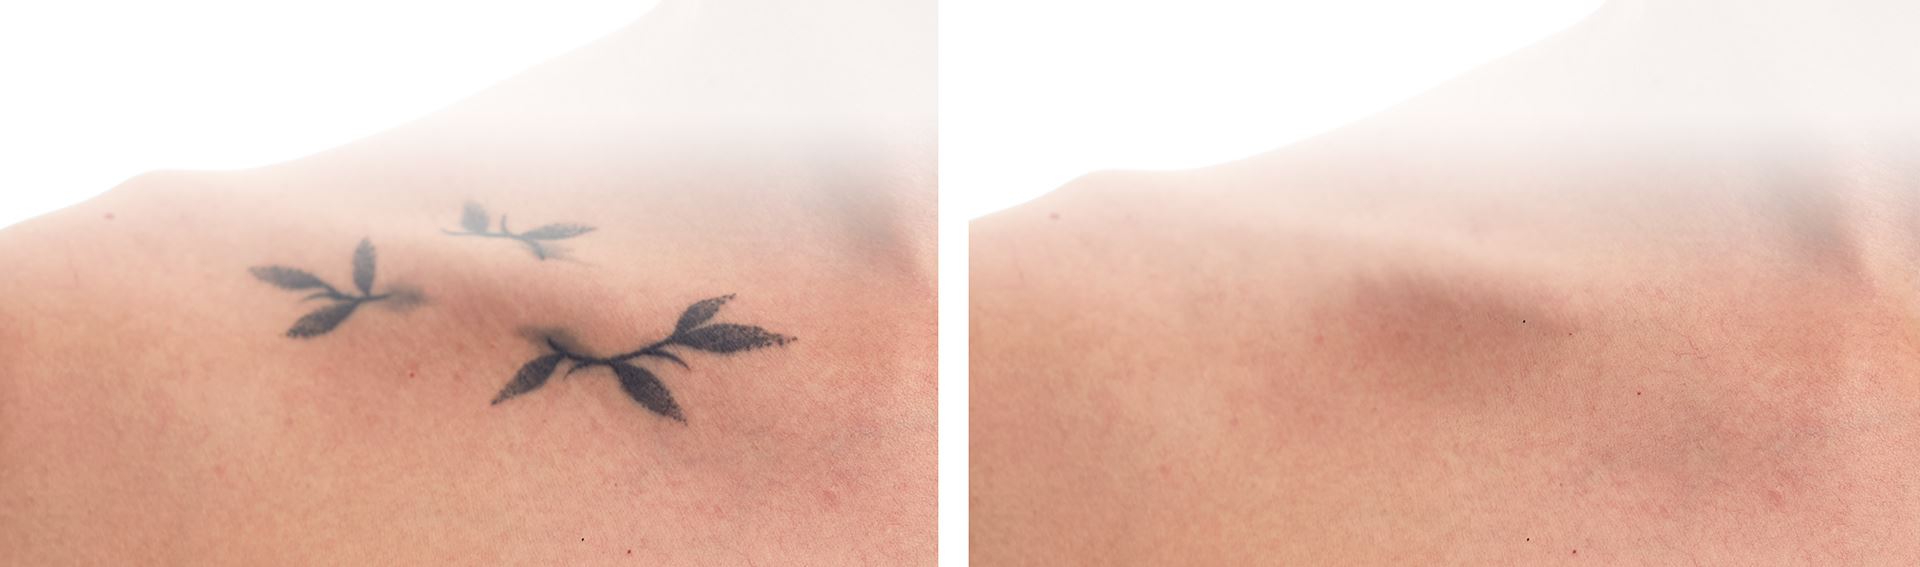 The advantages of the picosecond laser - BYE BAD TATTOO